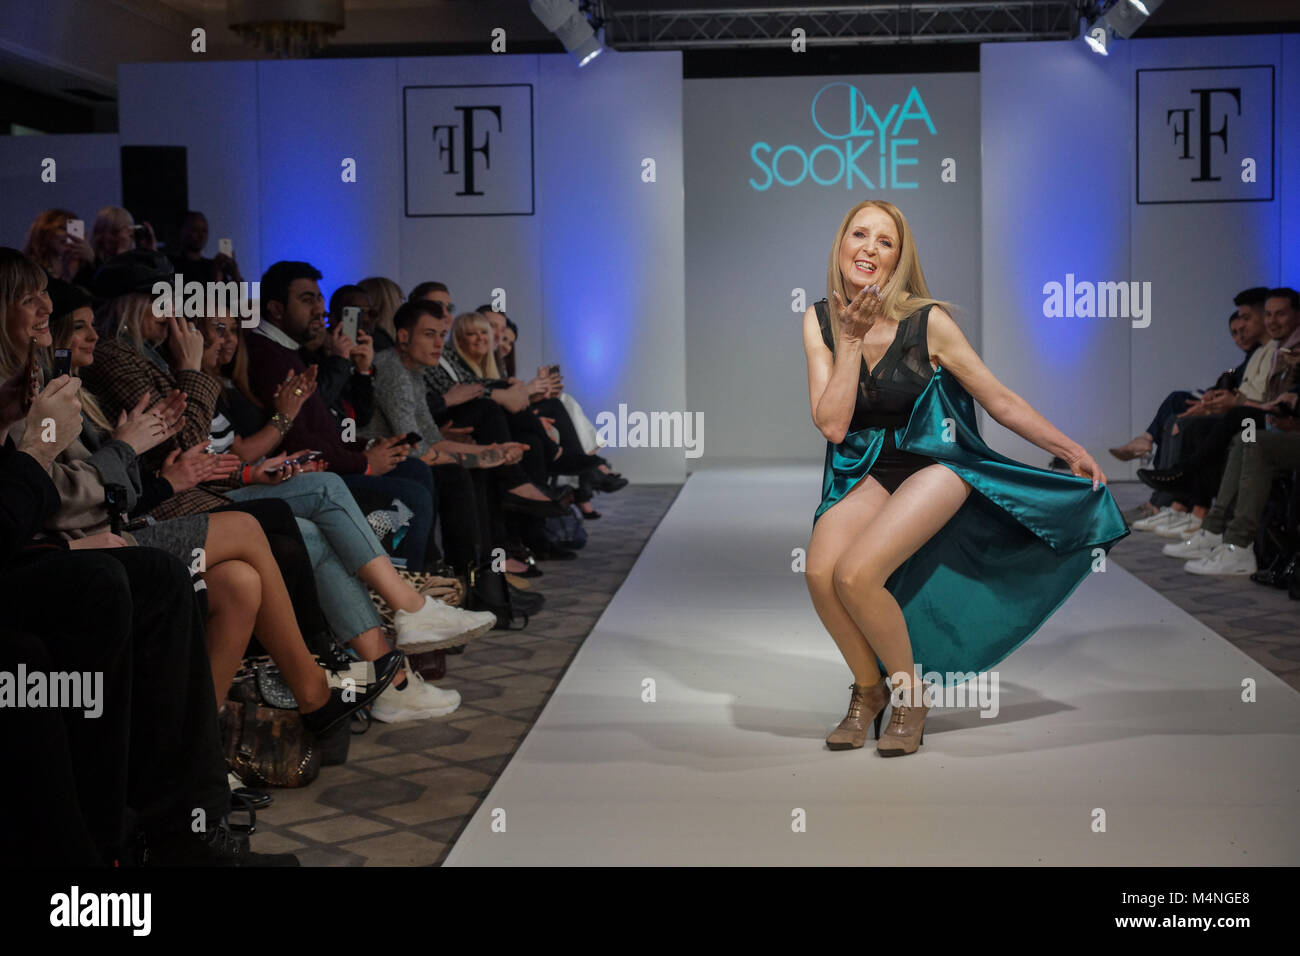 London, UK. 17th Feb, 2018. Gillian McKeith and daughter Afton rock the runway for designer Olya Sookie at Fashions Finest, Day 1 at De Vere Grand Connaught Rooms. © Peter Hogan/Alamy Live News Stock Photo